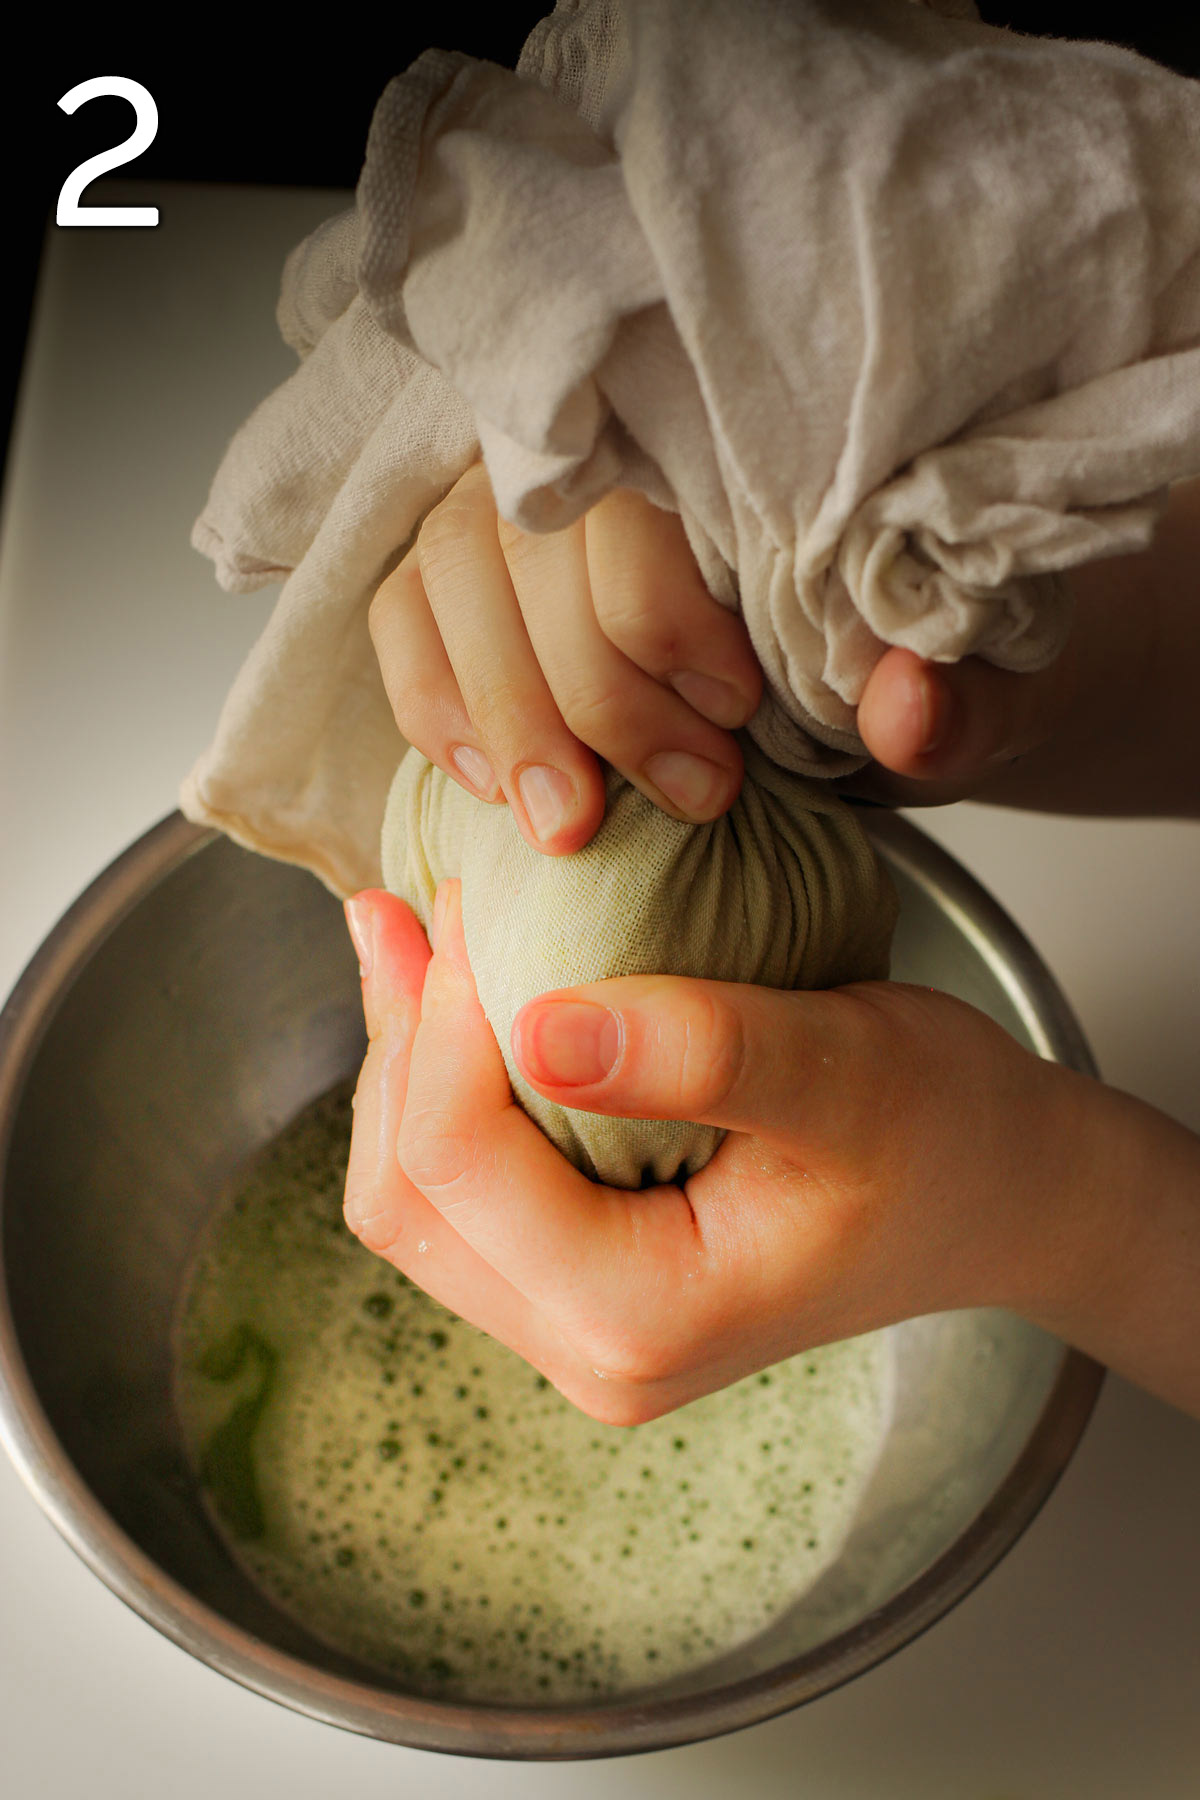 squeezing zucchini-filled tea towel over a bowl filled with zucchini liquid.